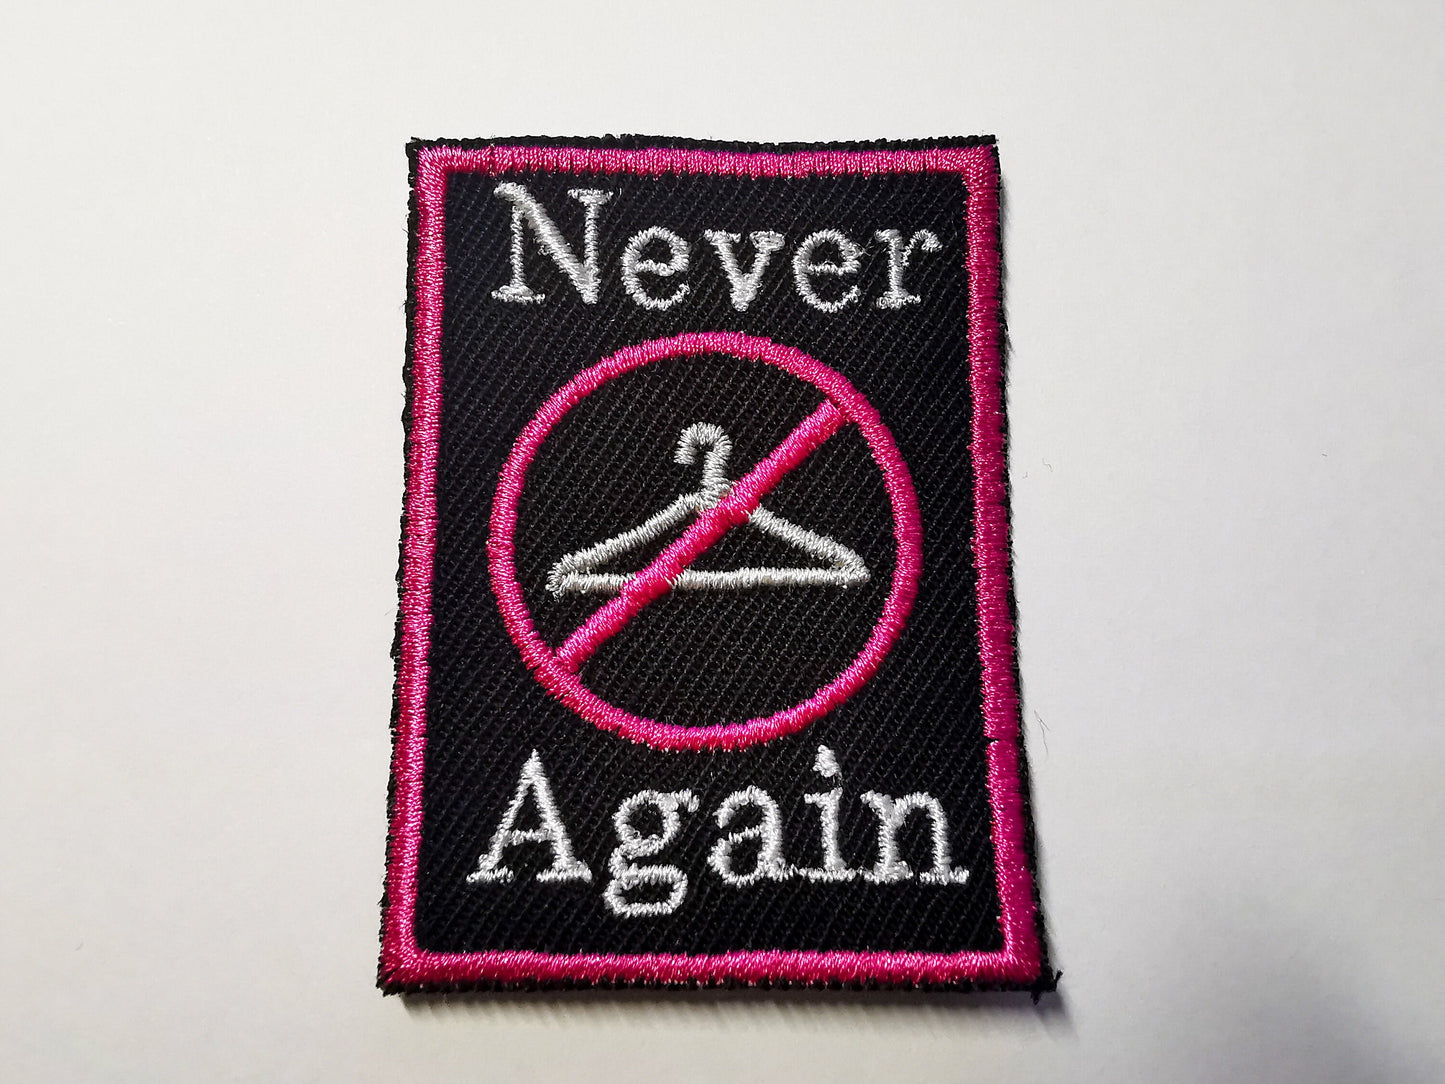 Never Again Abortion Rights Feminism Iron on or Sew On Embroidered Patch